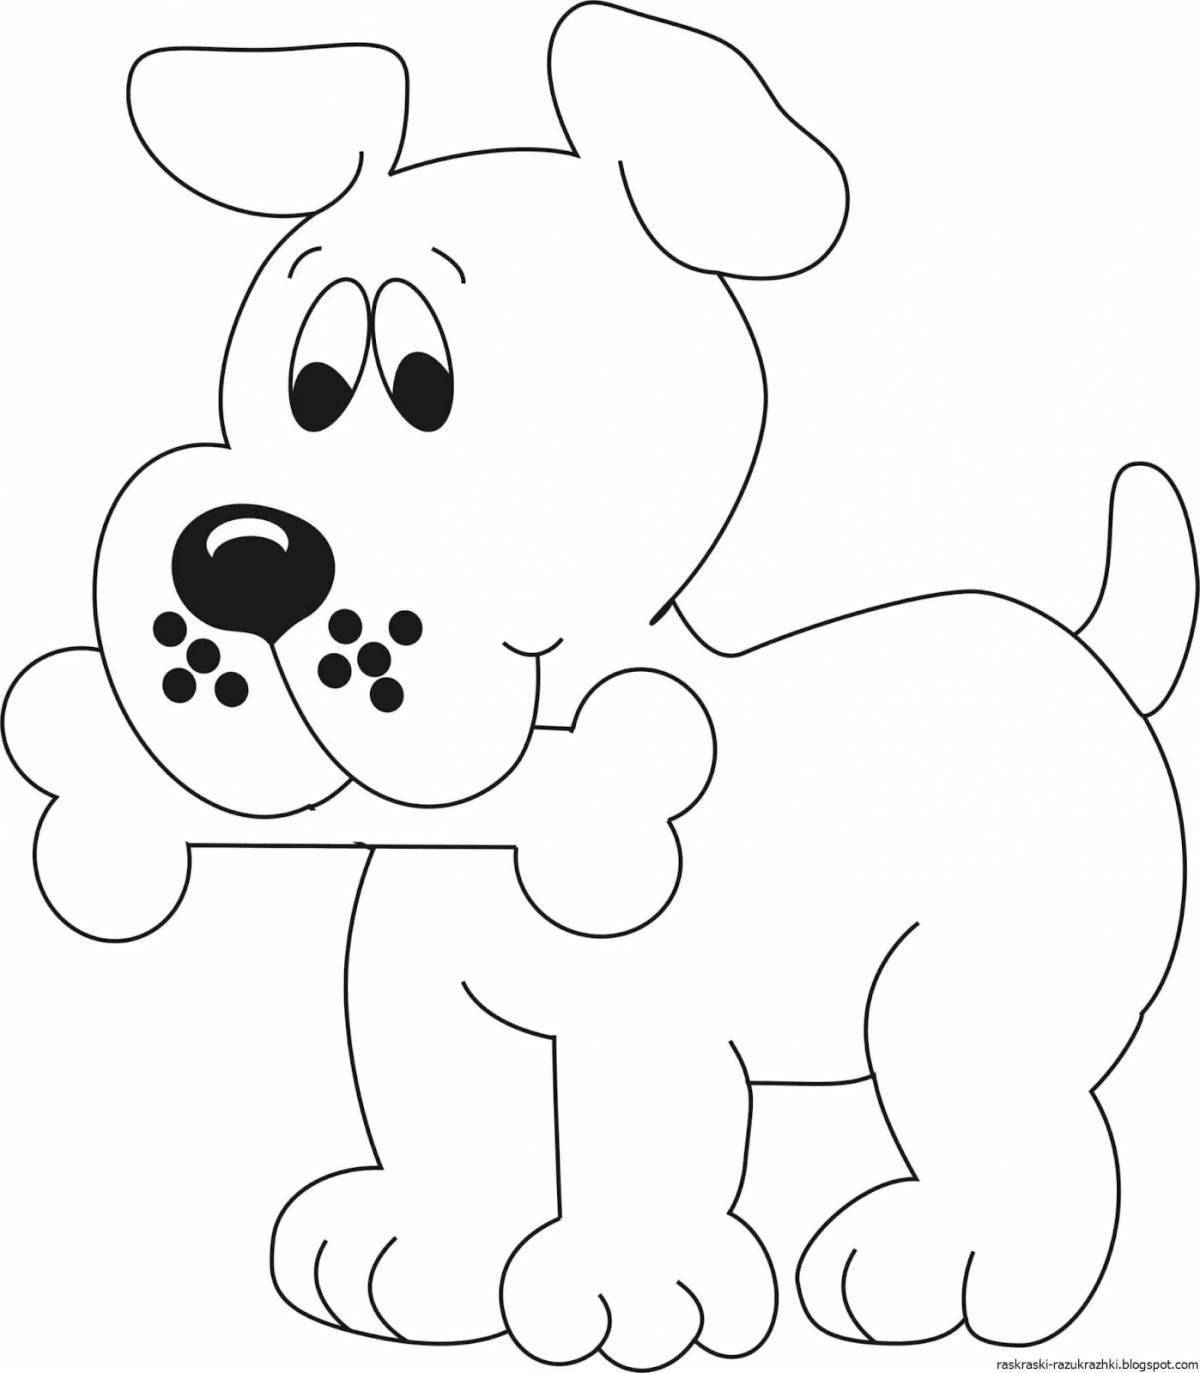 Coloring book twinkling dog for kids